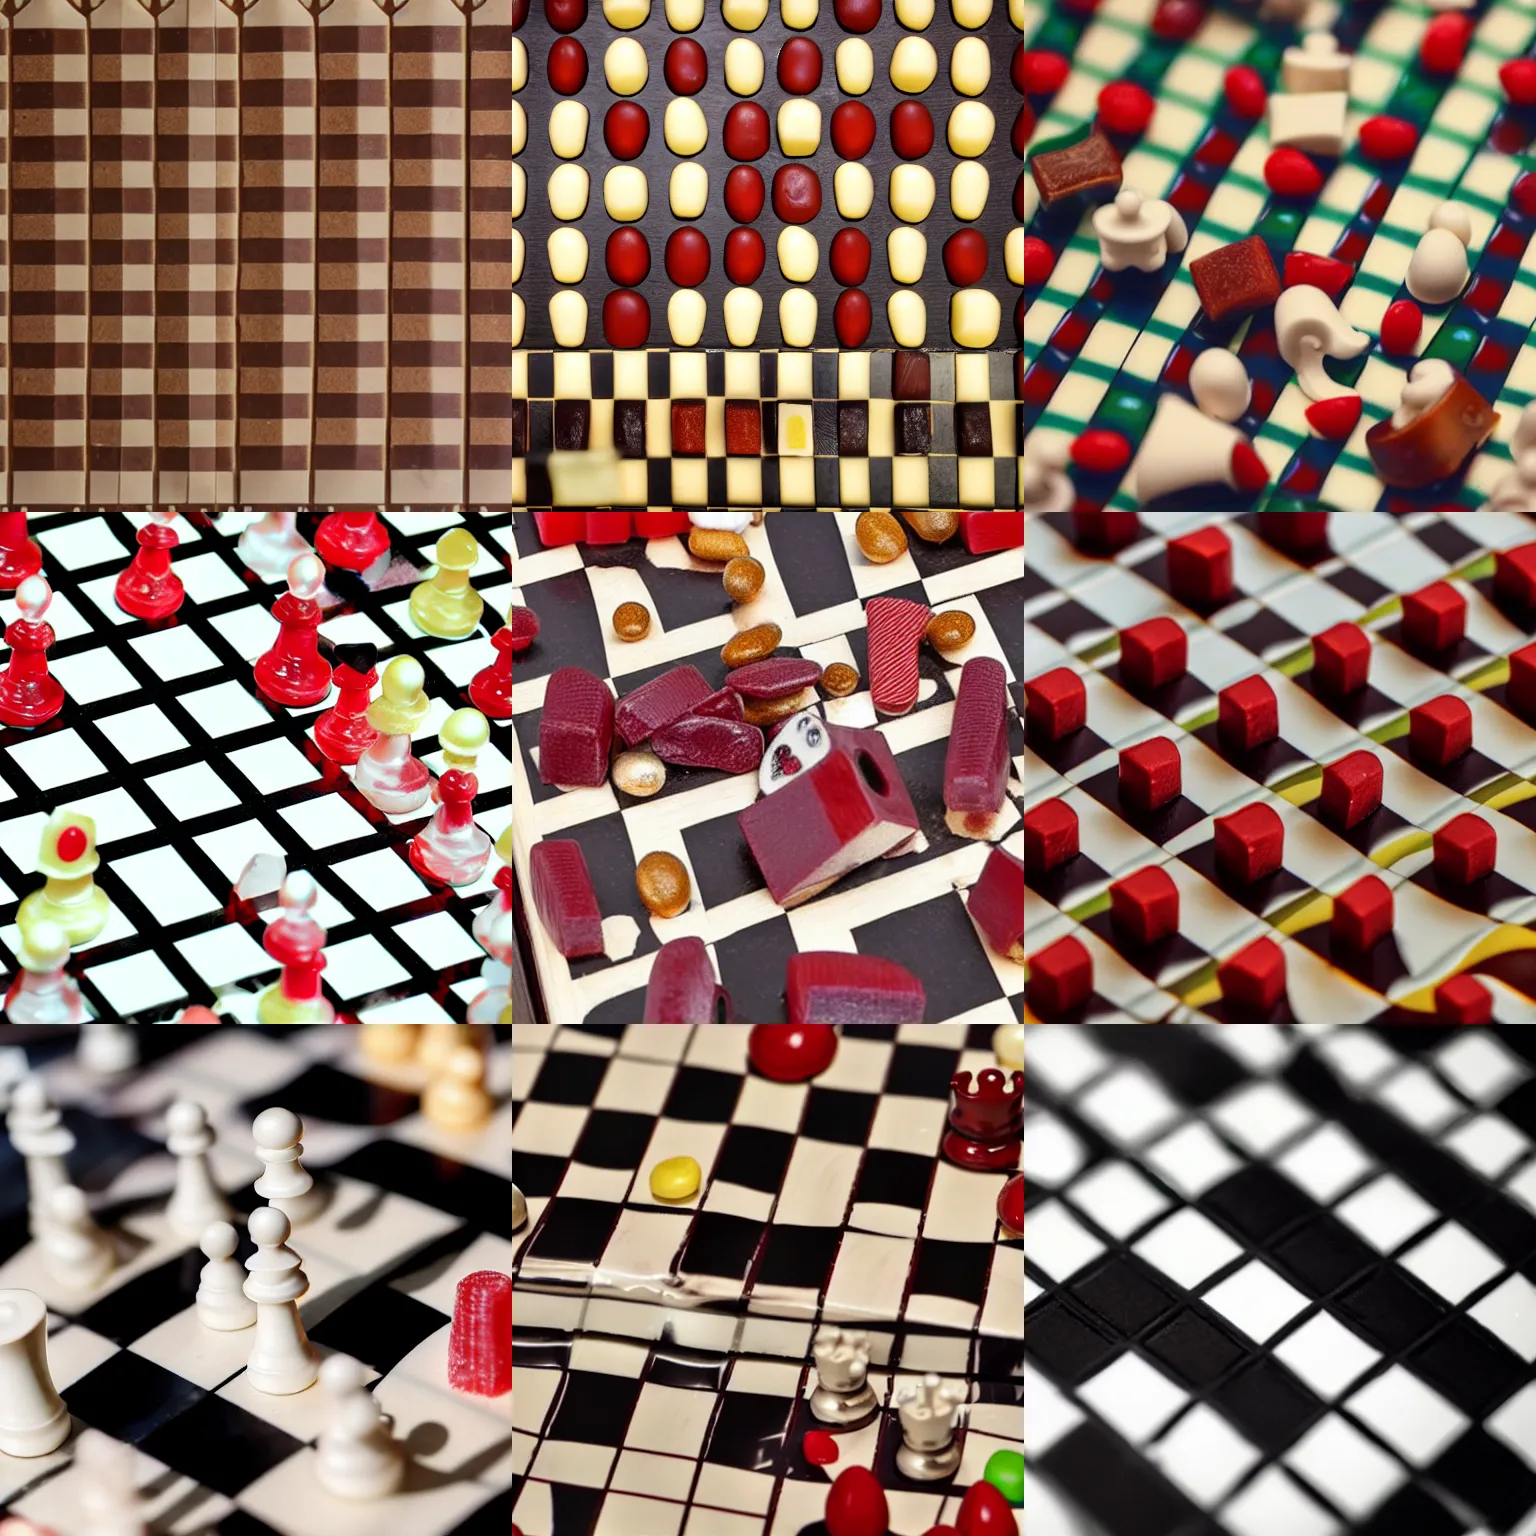 Prompt: close up of a chessboard made of candy